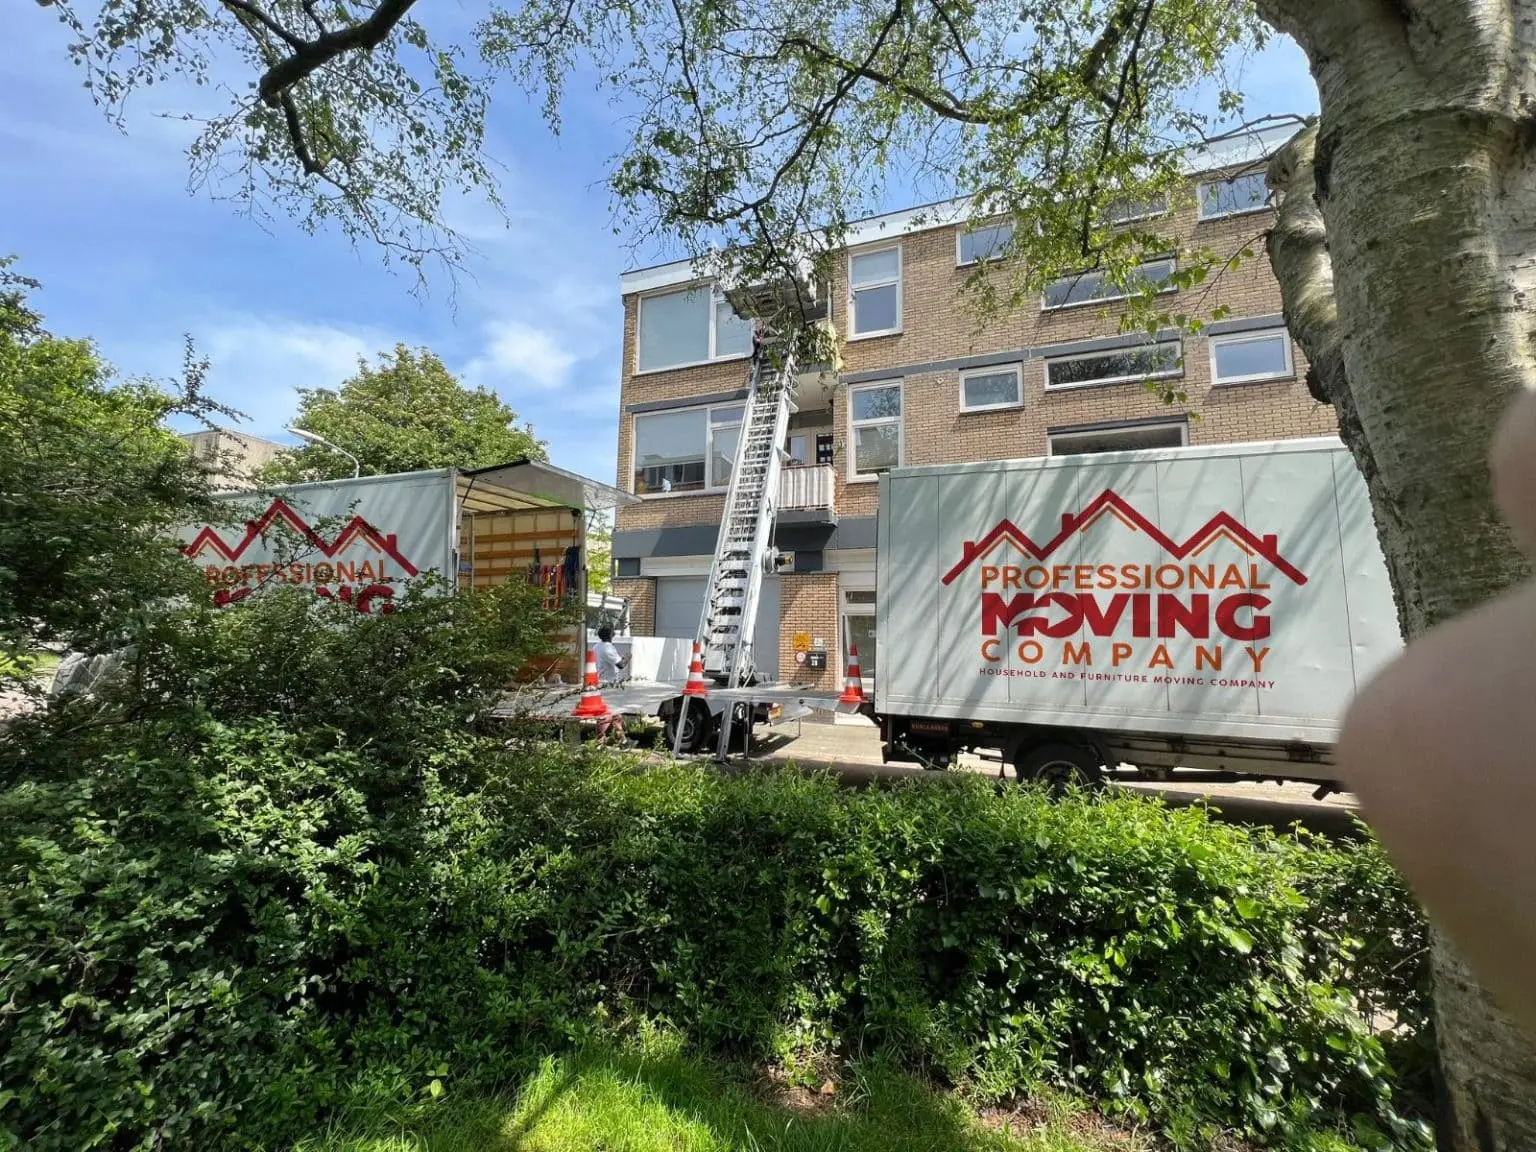 Servicing Major Cities in the Netherlands | Moving Company Krimpenerwaard | Moving Company Krimpenerwaard